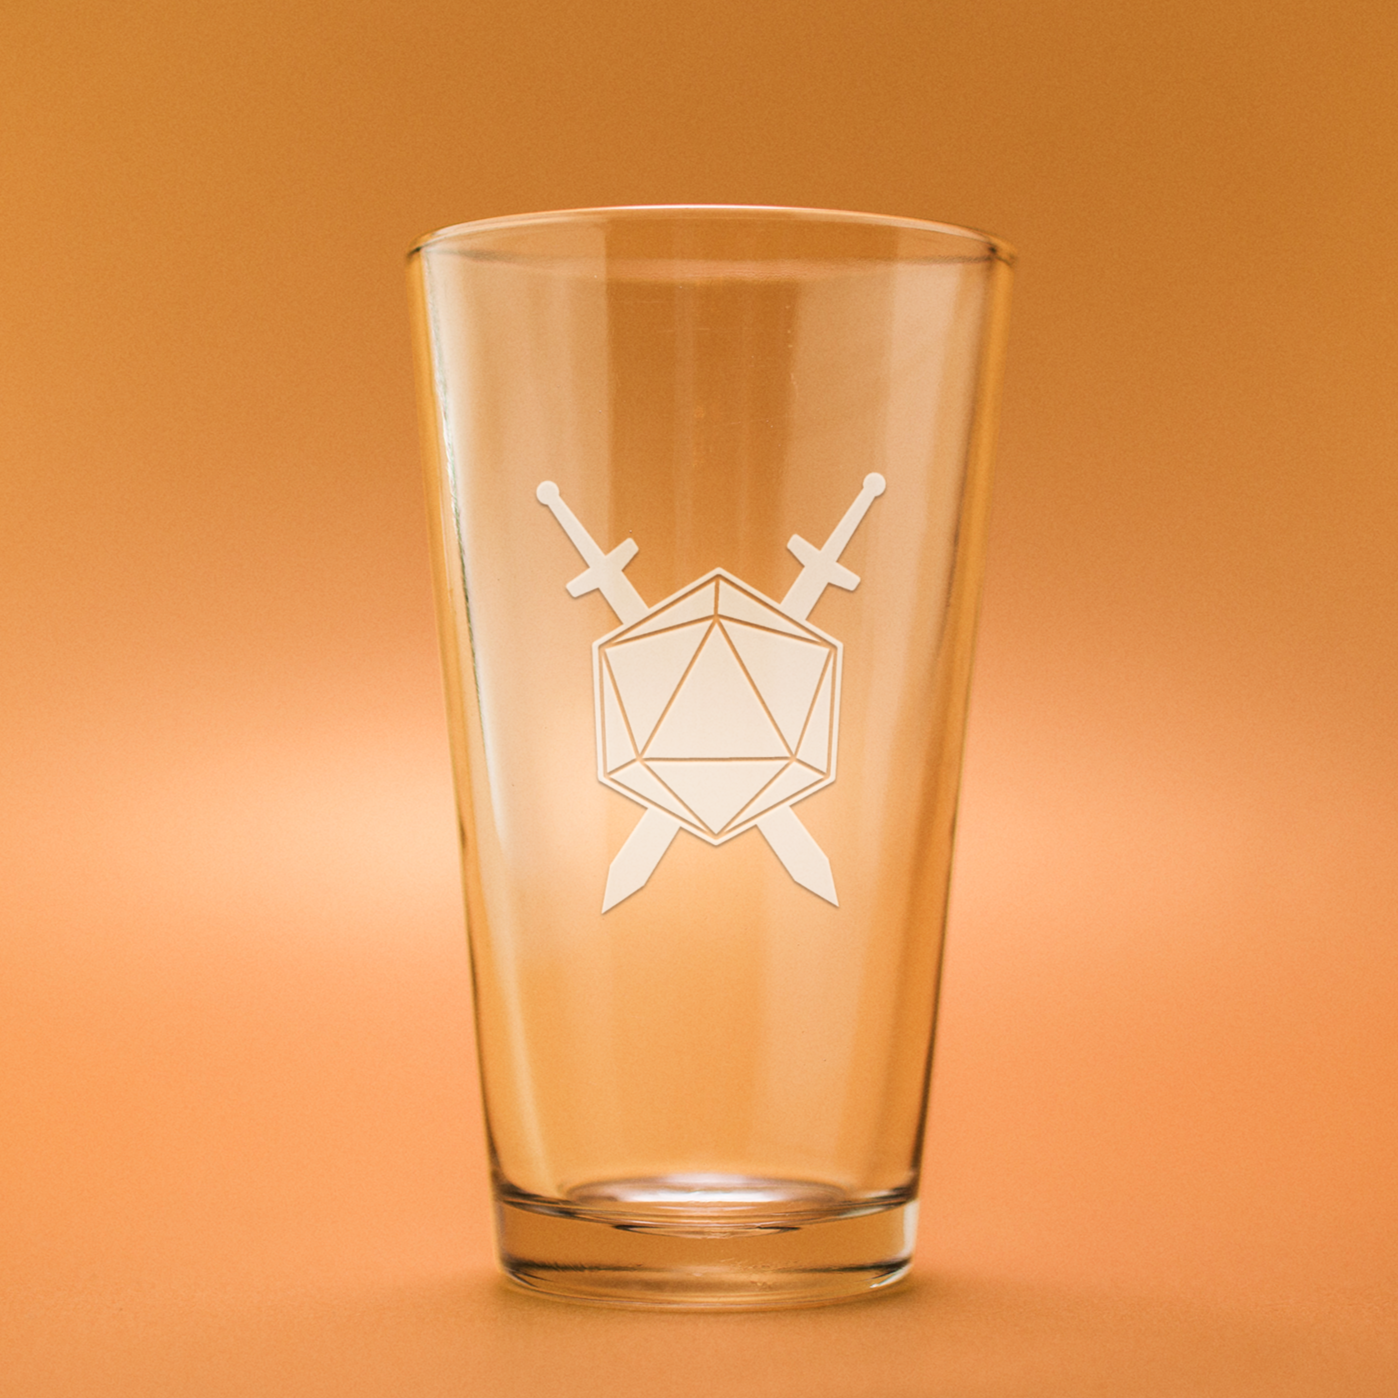 D20 and Sword Crest Fantasy Game Etched Beer Style Glass